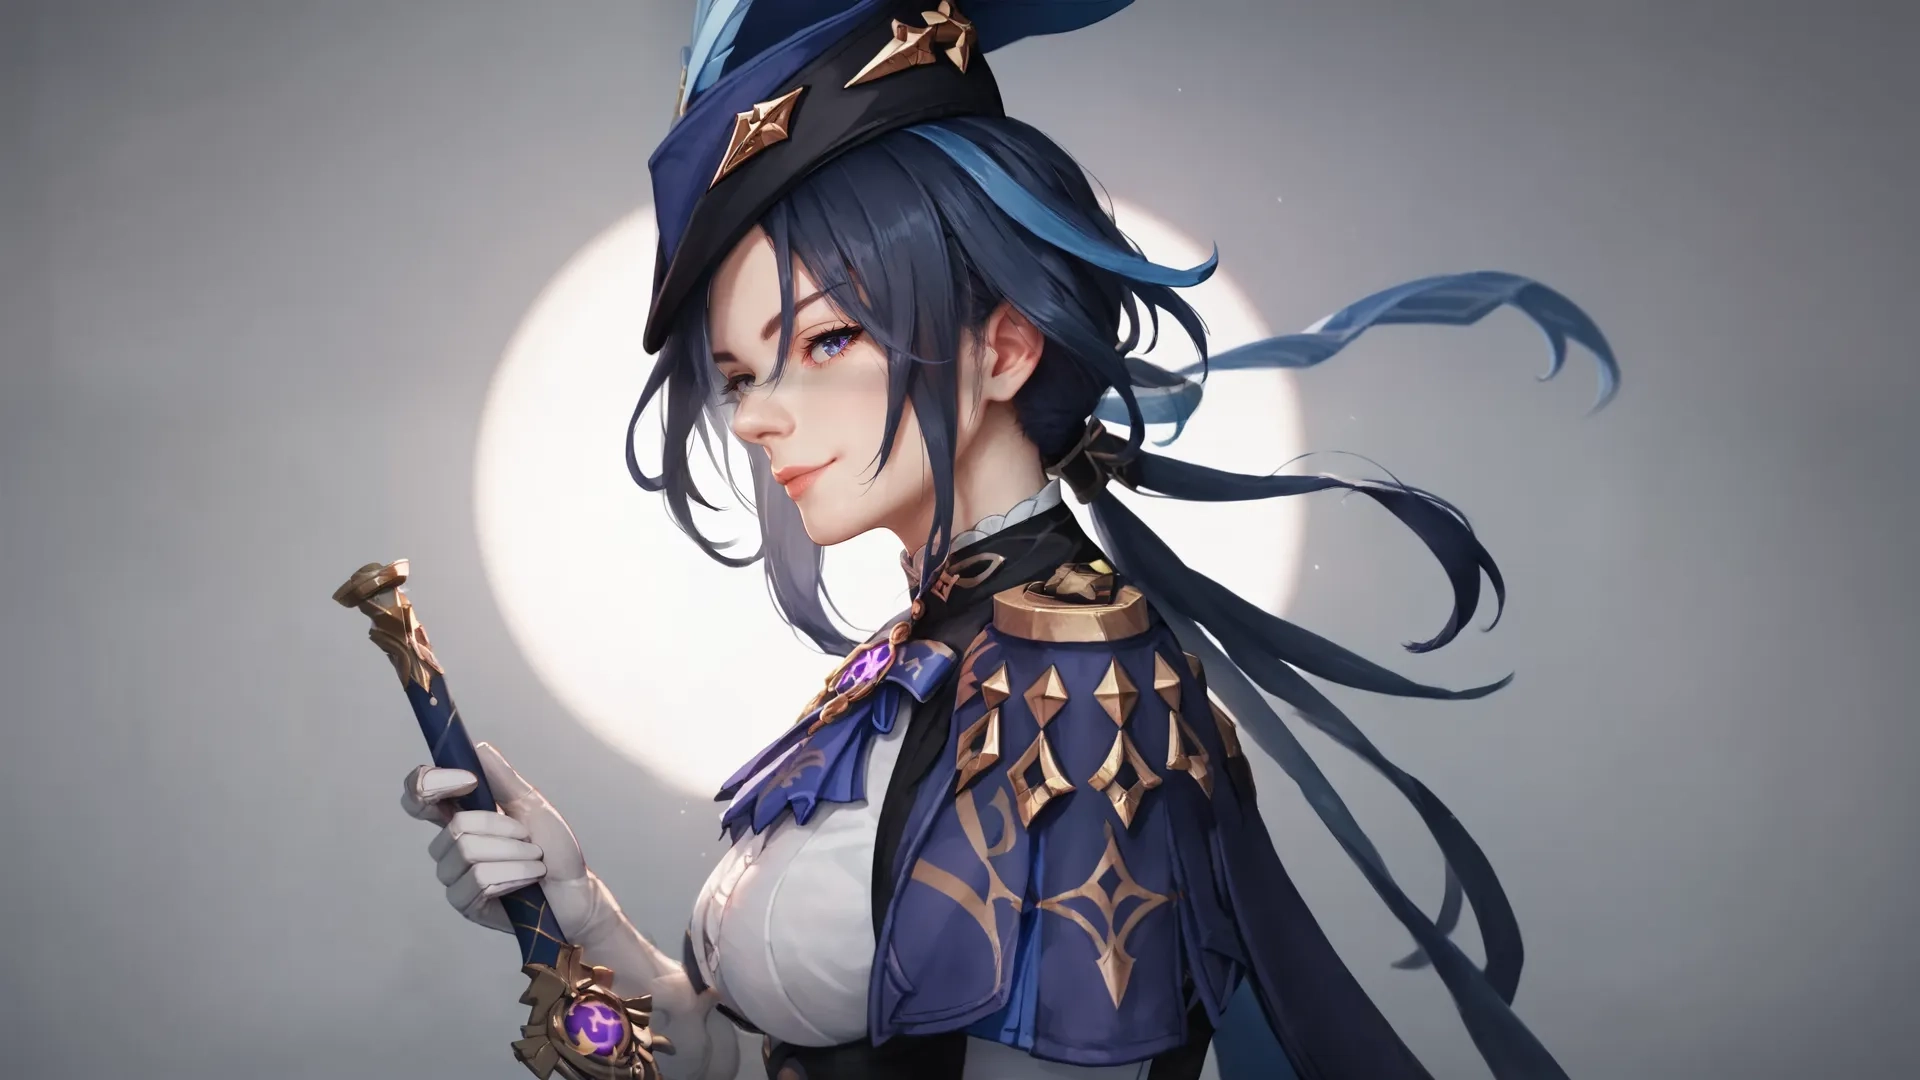 an animated woman is holding a sword and standing in front of a bright moon and a shining full moon rising out of her face, against dark colors
